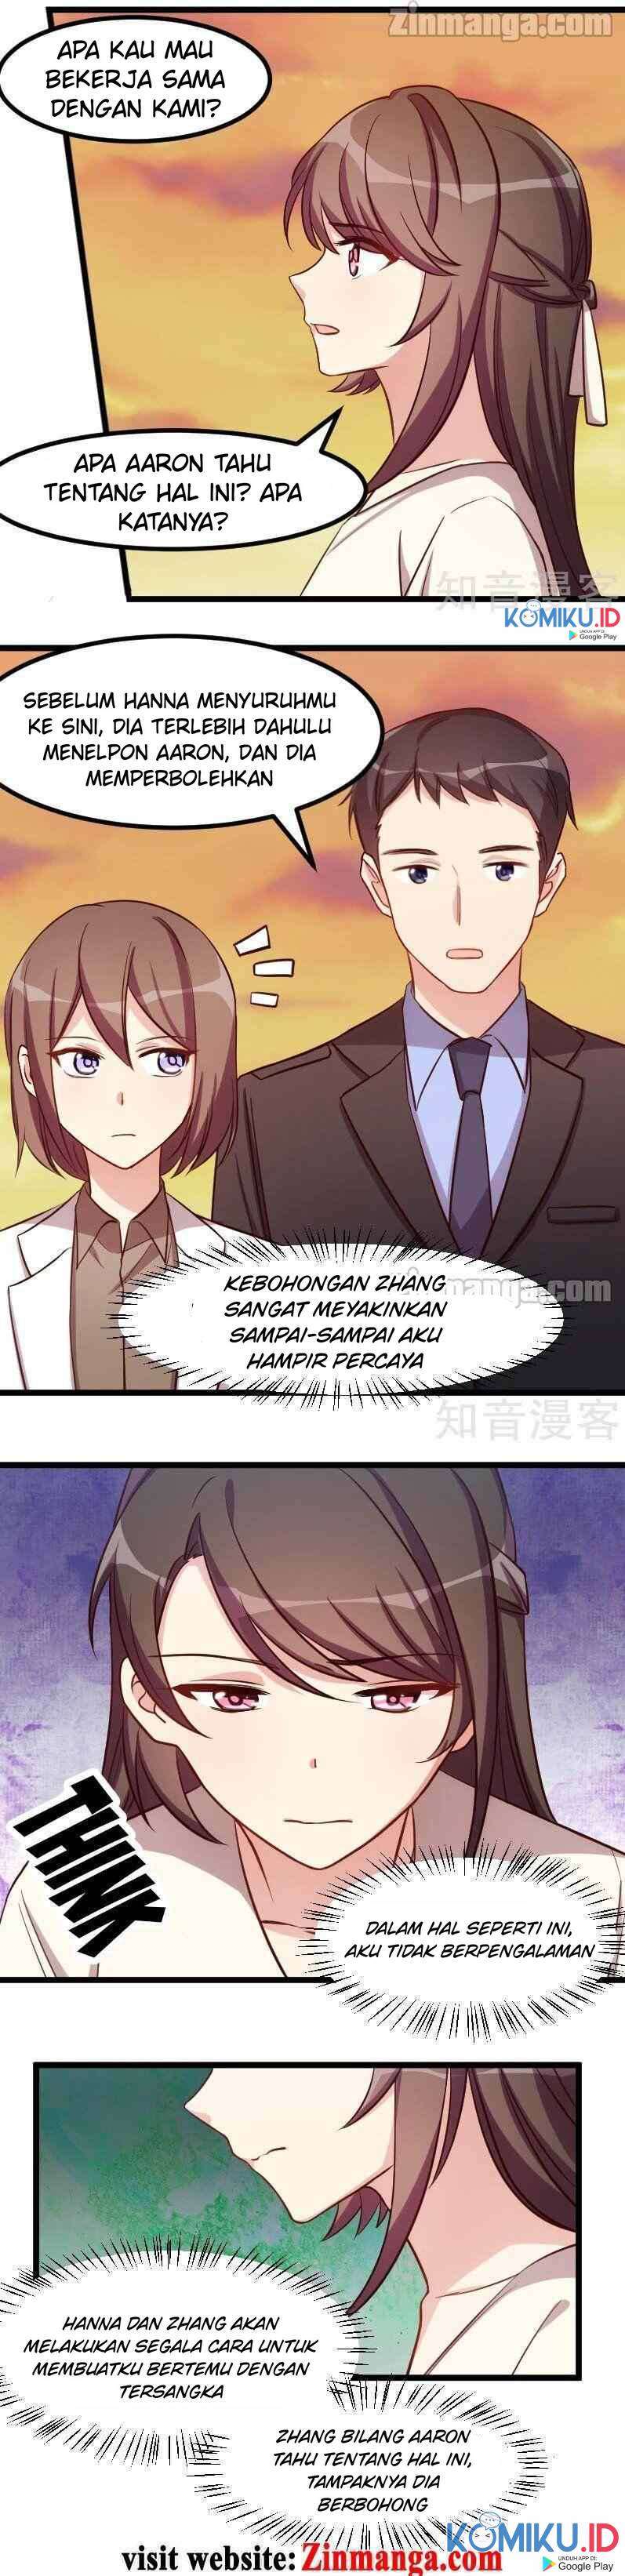 CEO’s Sudden Proposal Chapter 213